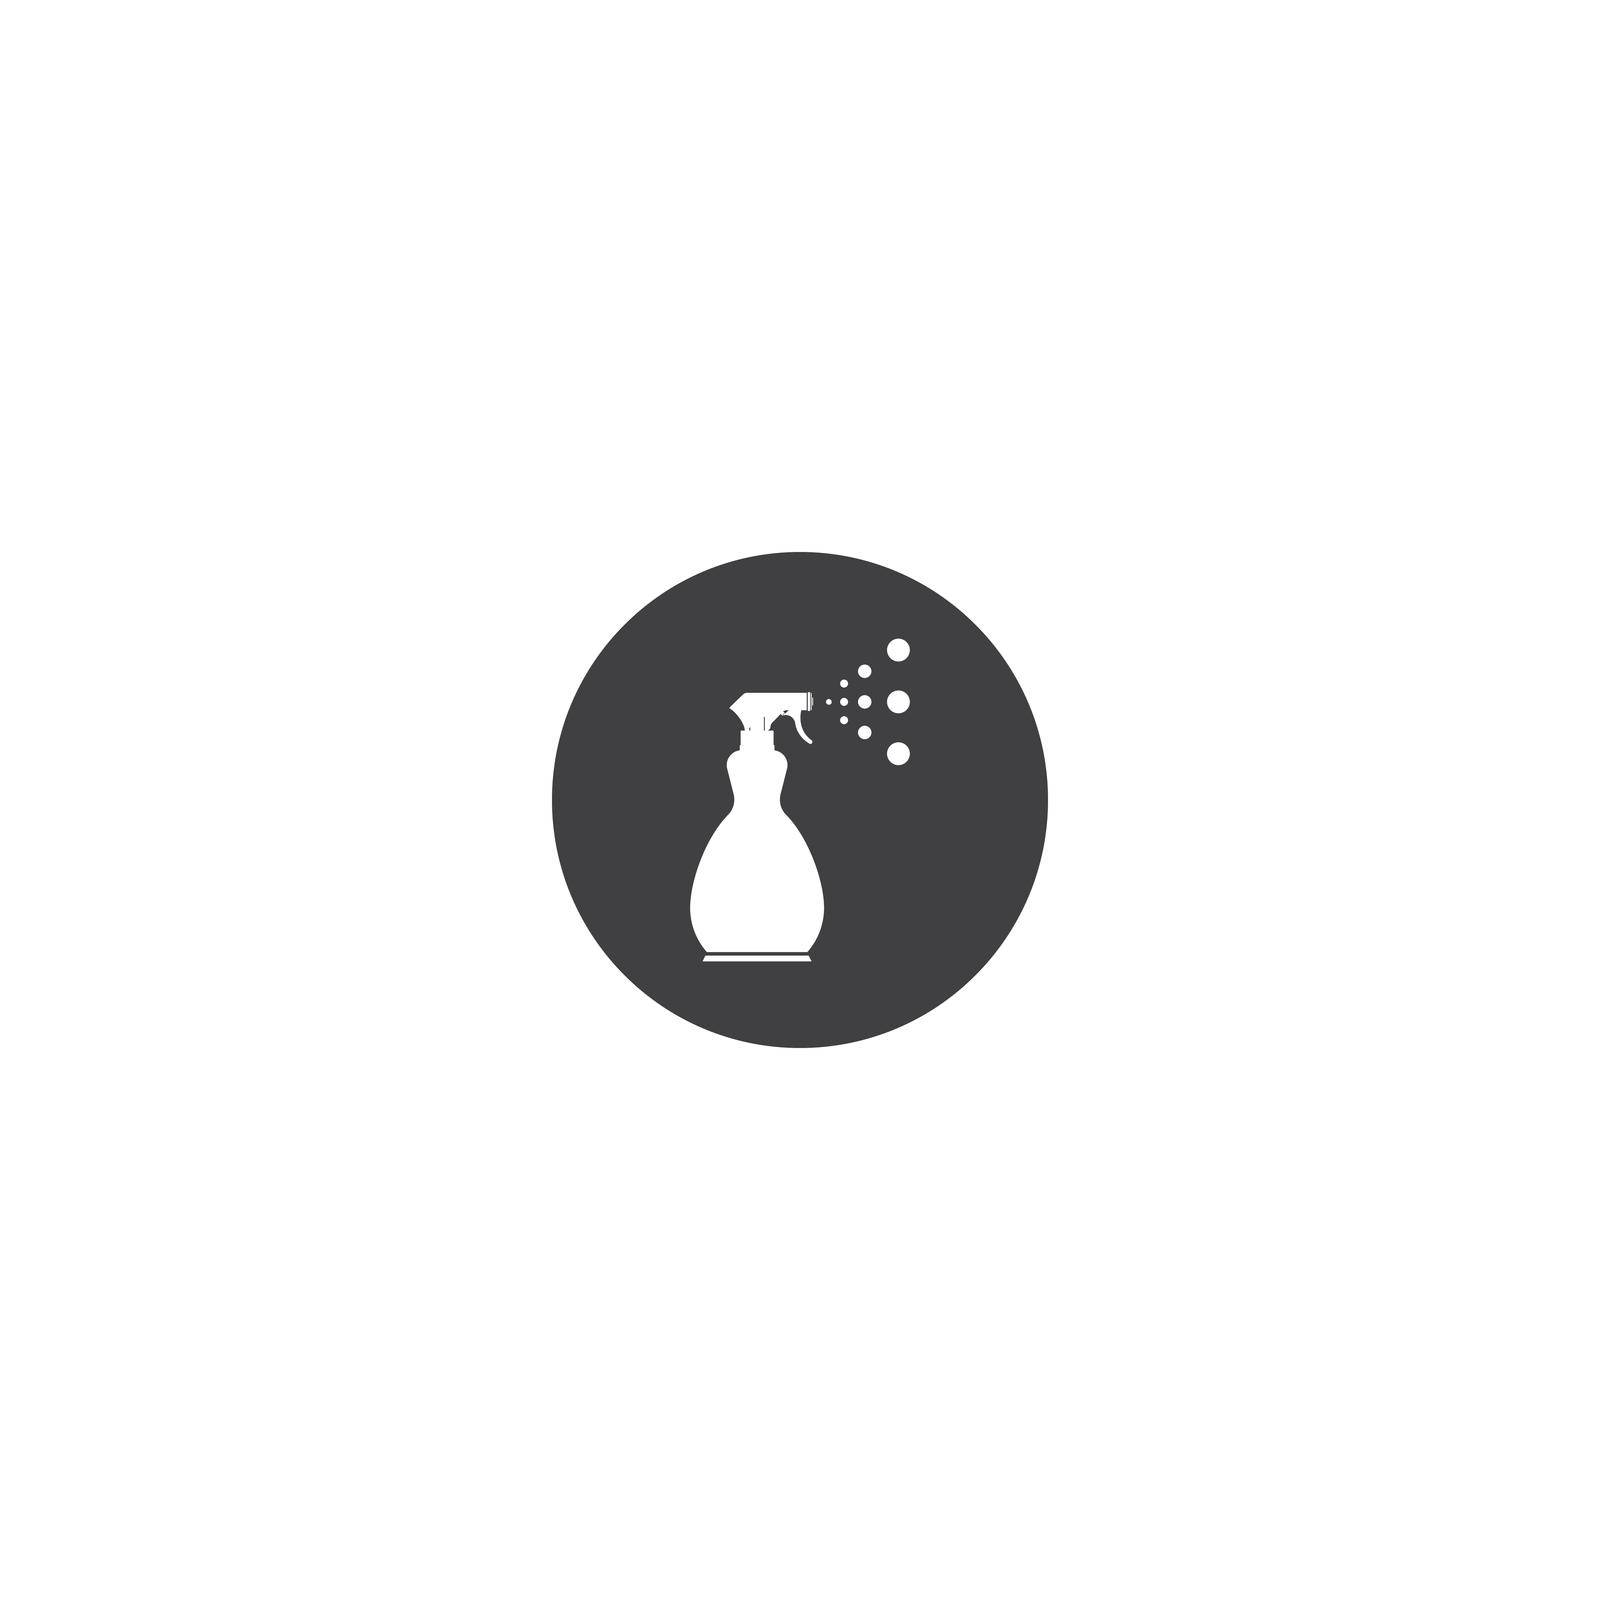 Spray Bottle icon by rnking